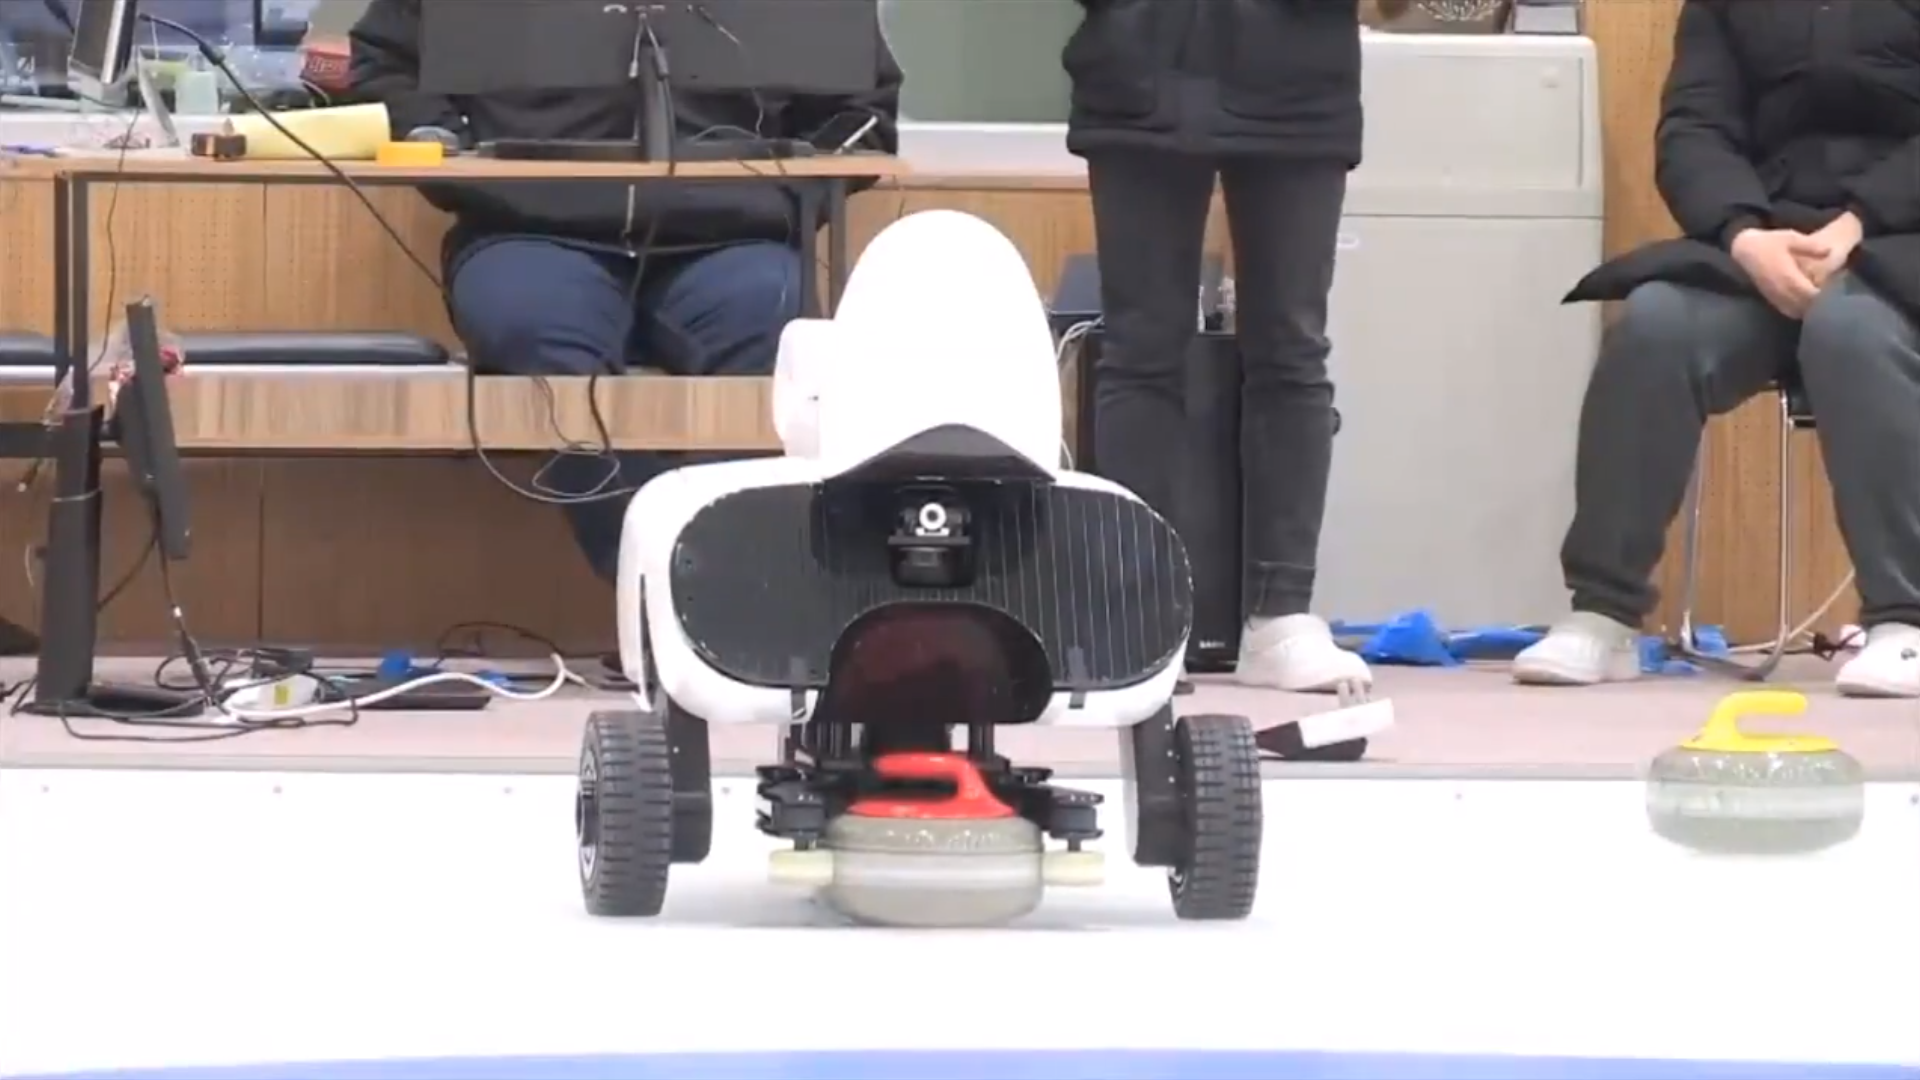 A robot has been developed to play curling matches ©Korea University